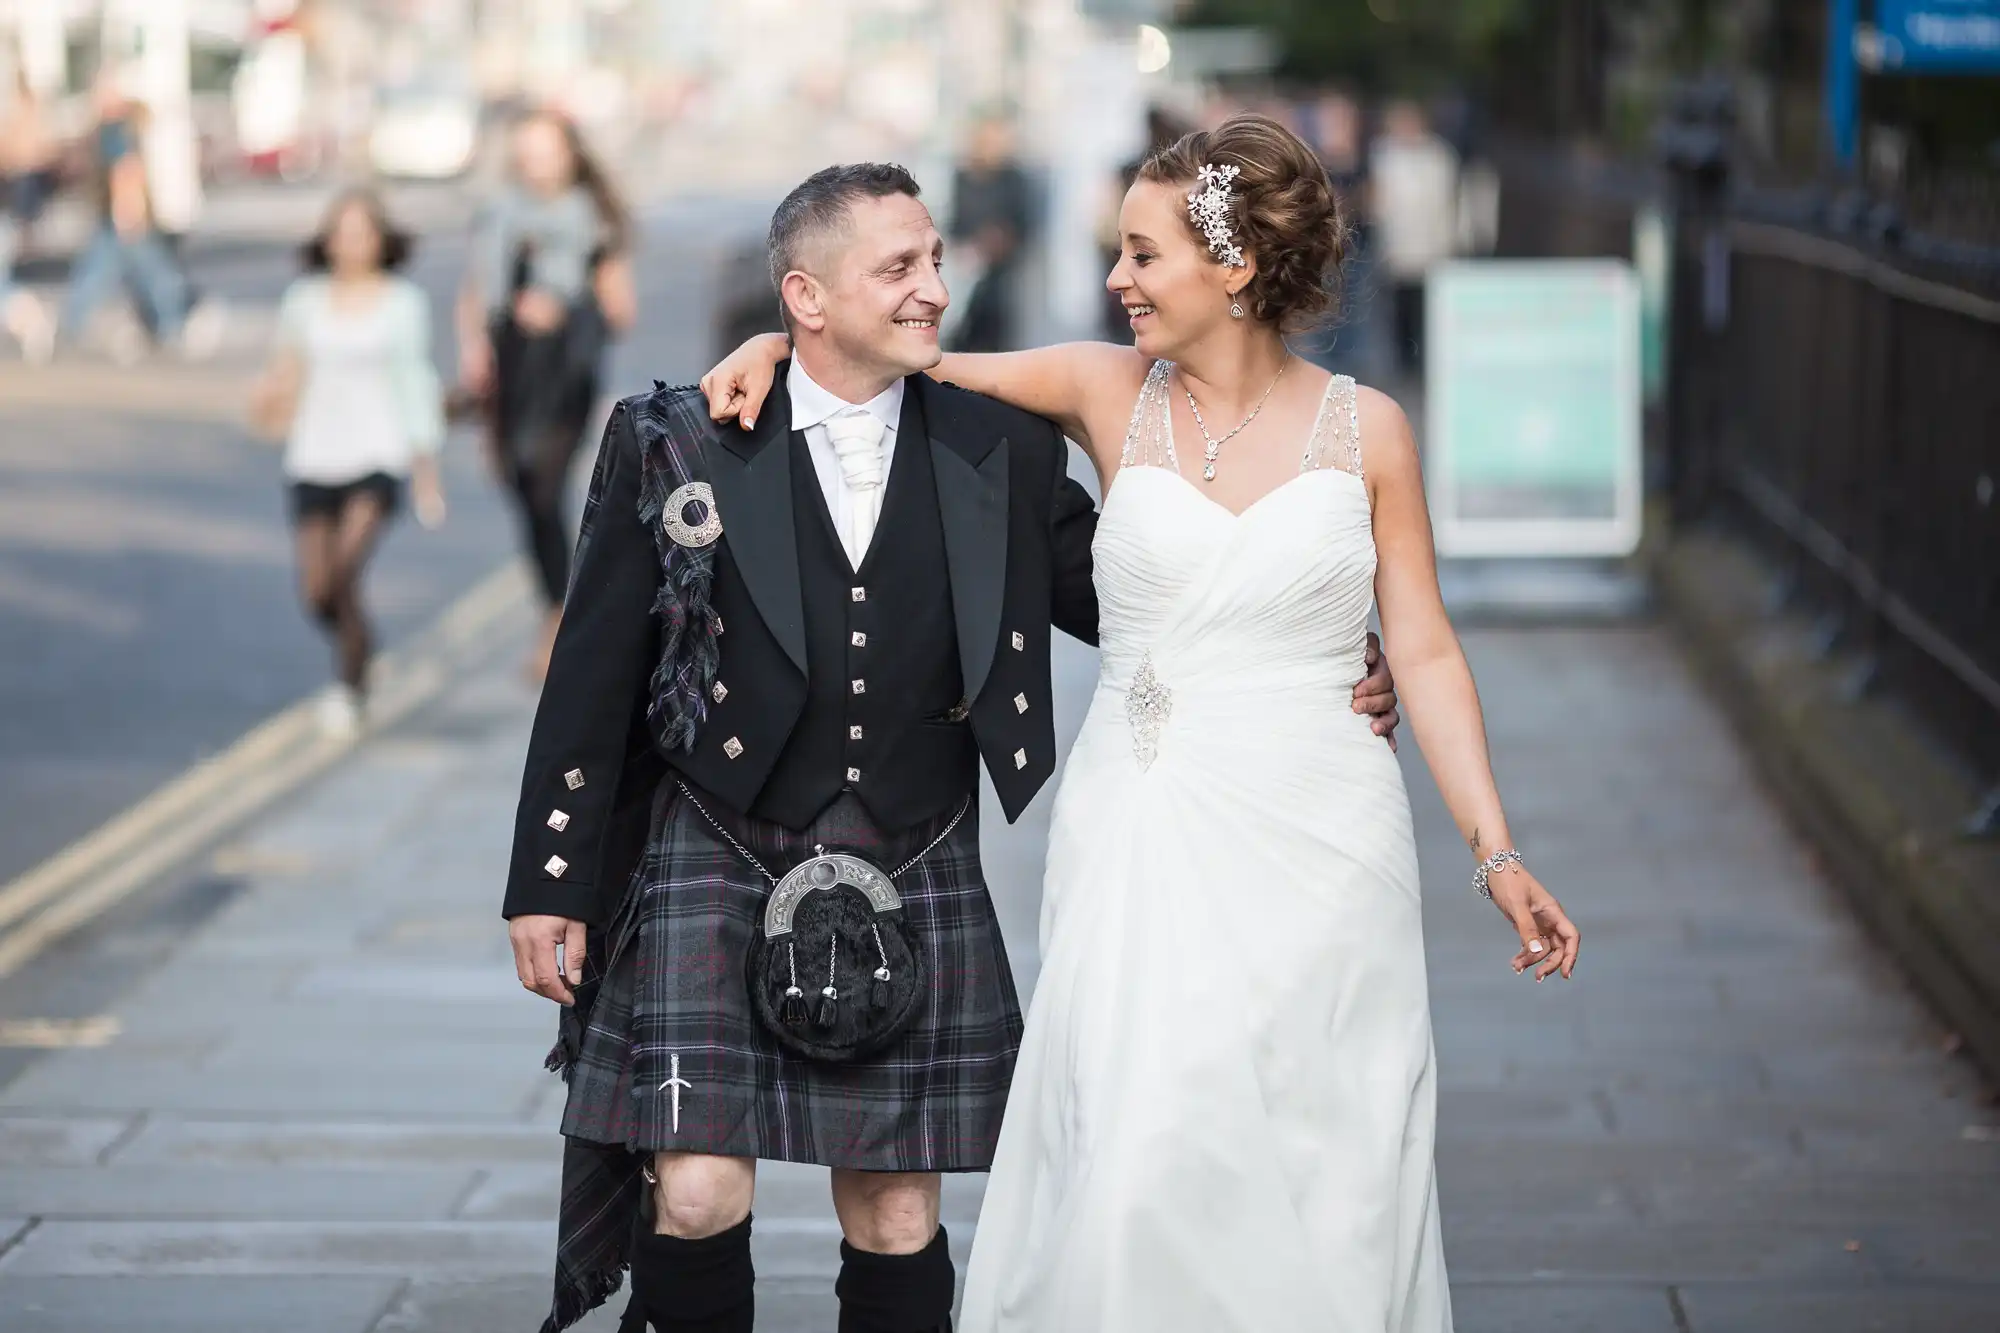 Bride in a white dress and groom in a kilt walking on a city street, smiling and looking at each other.